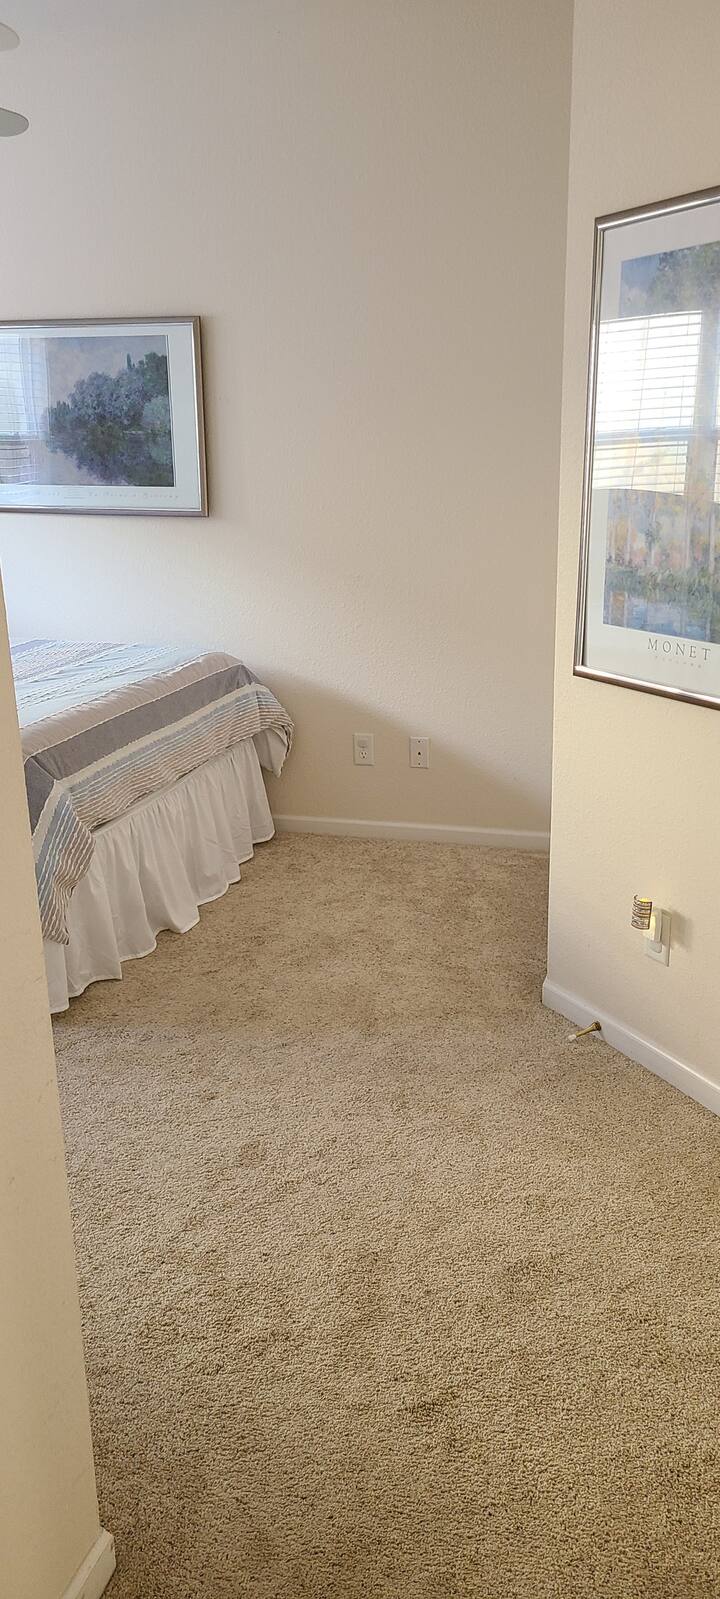 Entrance to 2nd bedroom with queen bed.